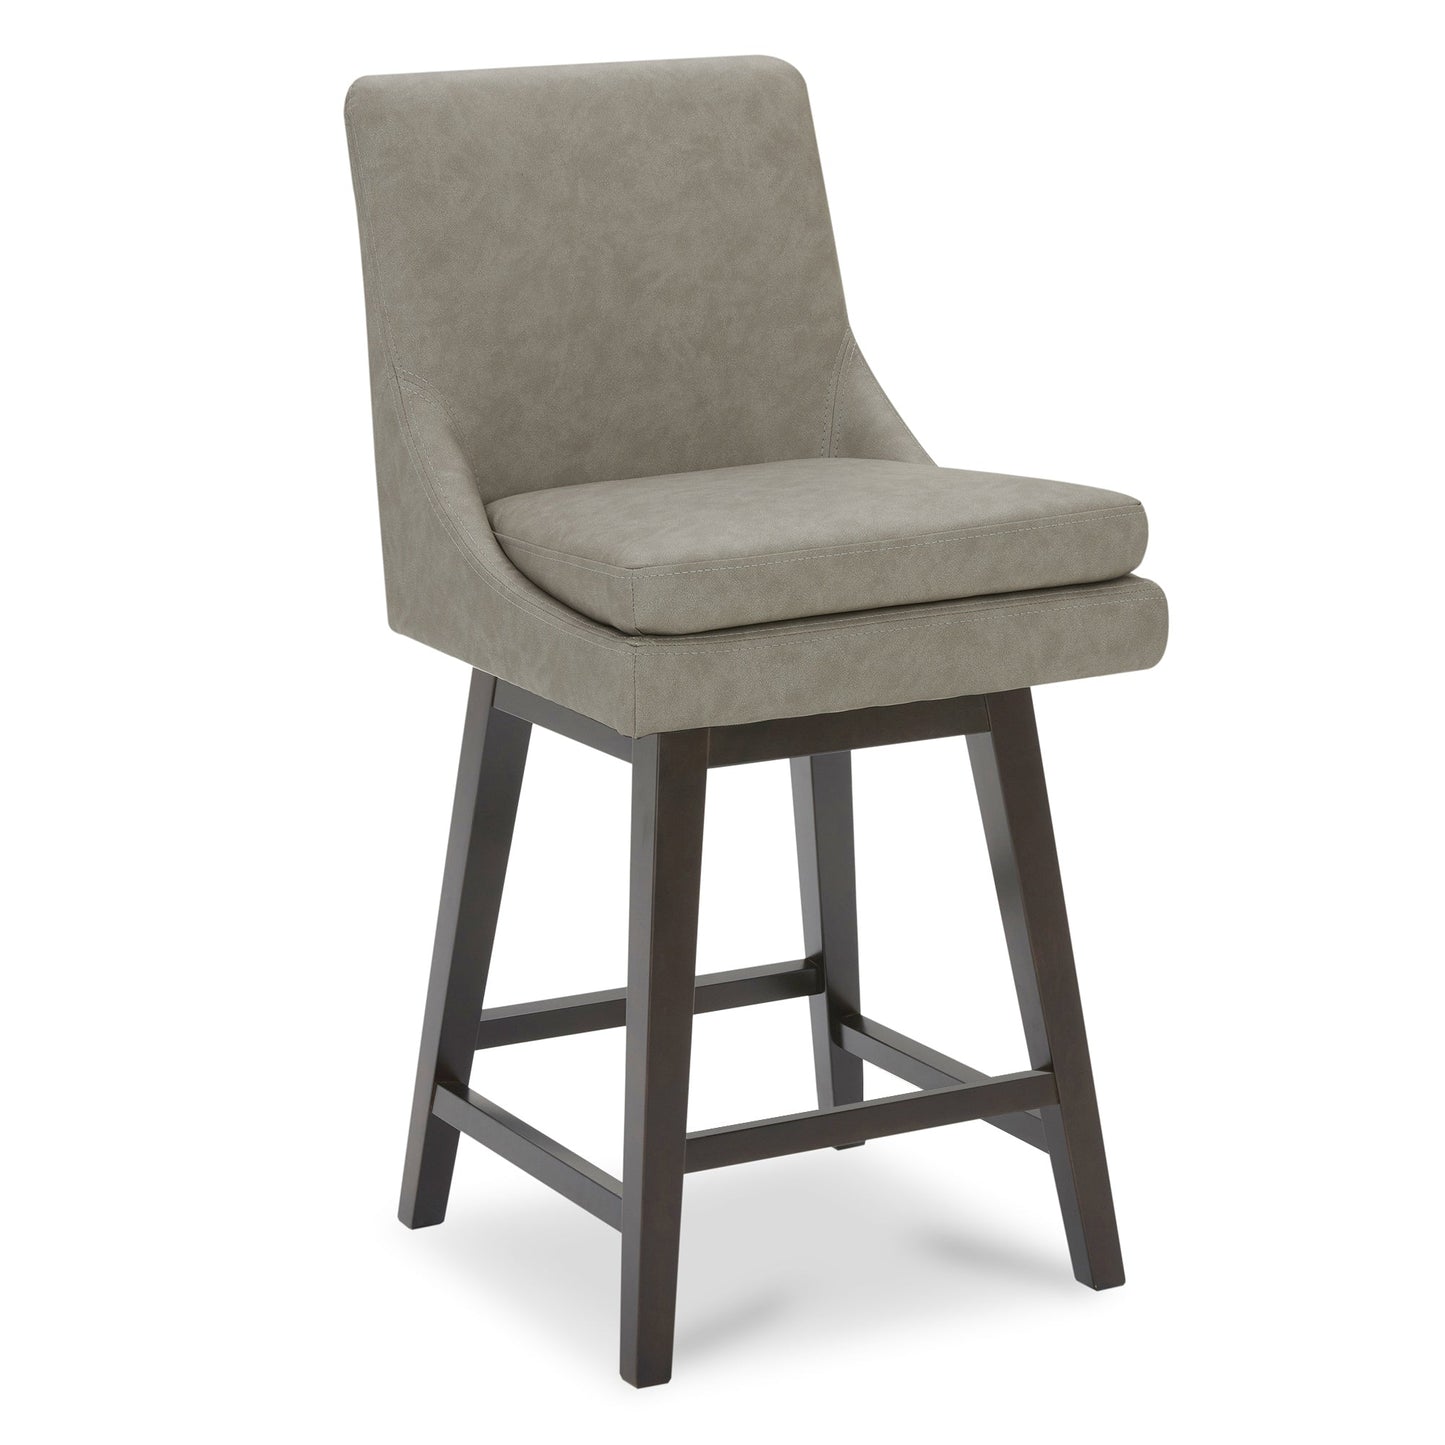 CHITA LIVING-Lissa Swivel Counter Stool 26.8''-Counter Stools-Faux Leather-Stone Gray-